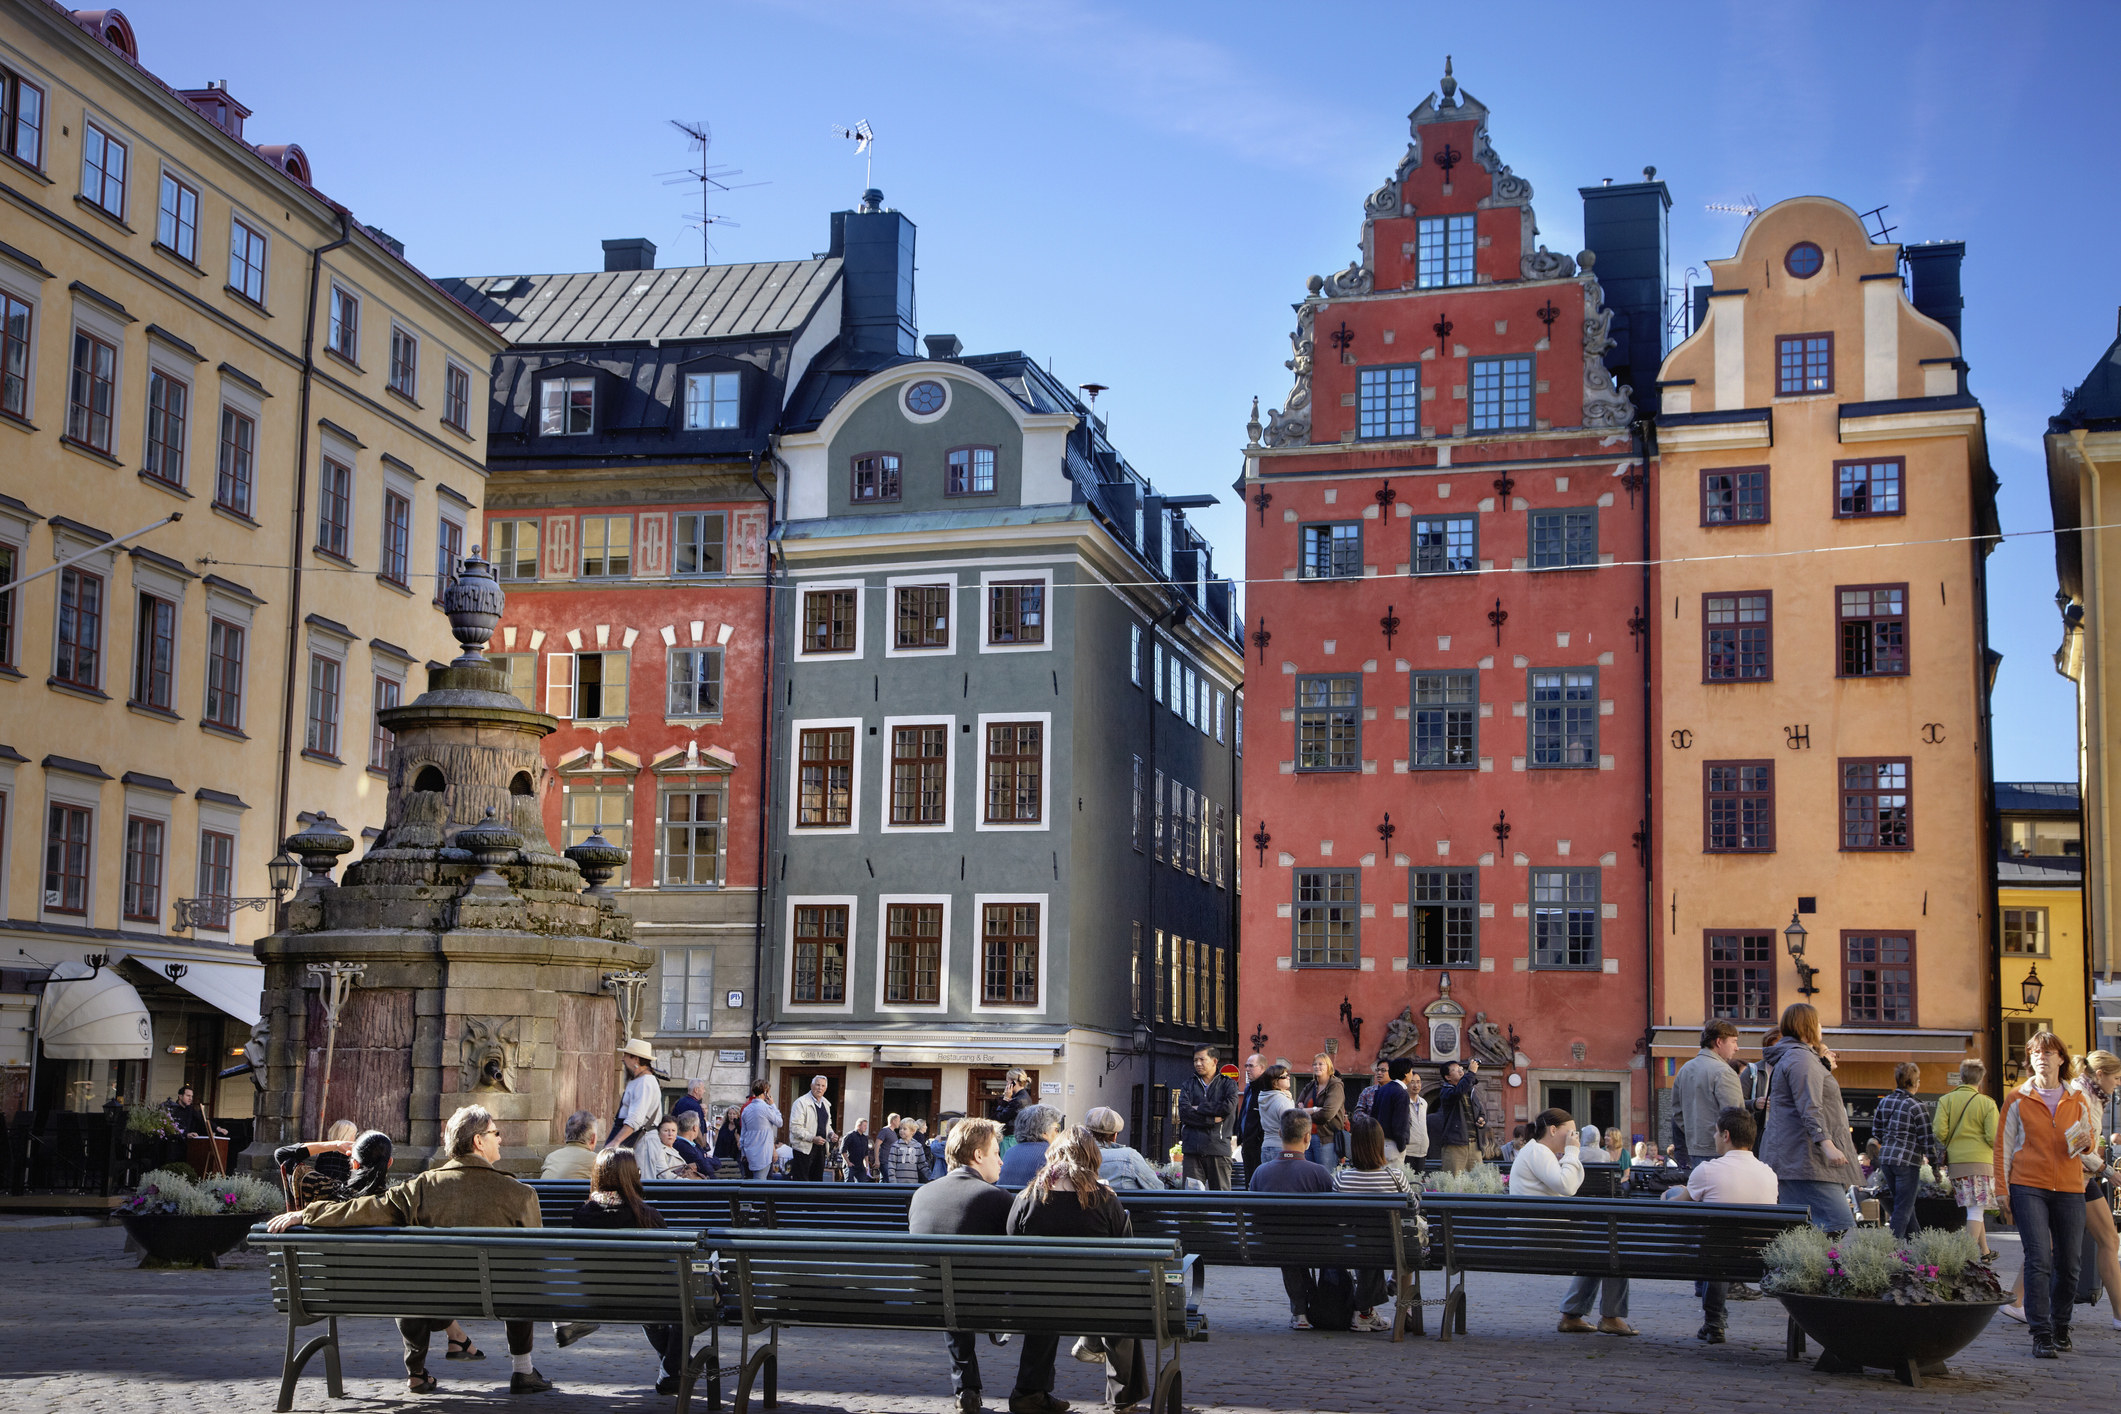 People sitting on benches in old town square in Stockholm